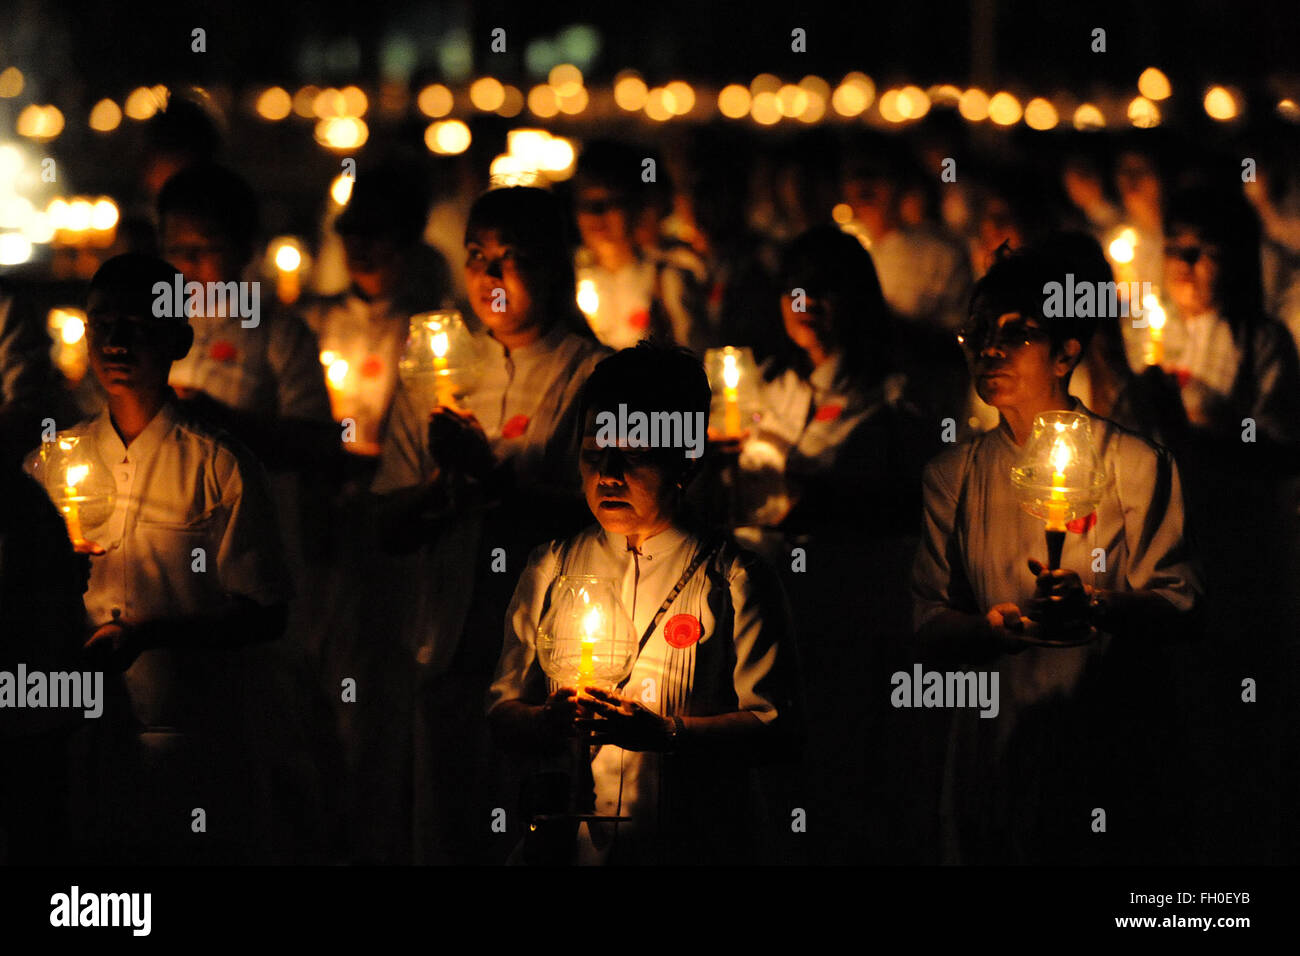 Pathum Thani, Thailand. 22nd Feb, 2016. Thai people light candles and pray during Makha Bucha Day ceremonies at Wat Phra Dhammakaya Temple in Pathum Thani Province, Thailand, on Feb. 22, 2016. As one of Thailand's most important Buddhist festivals, Makha Bucha is observed every full moon night of the third month in the Thai lunar calendar. On the Makha Bucha day, people flock to temples and venerate Buddhas as well as pray for blessedness. Credit:  Rachen Sageamsak/Xinhua/Alamy Live News Stock Photo